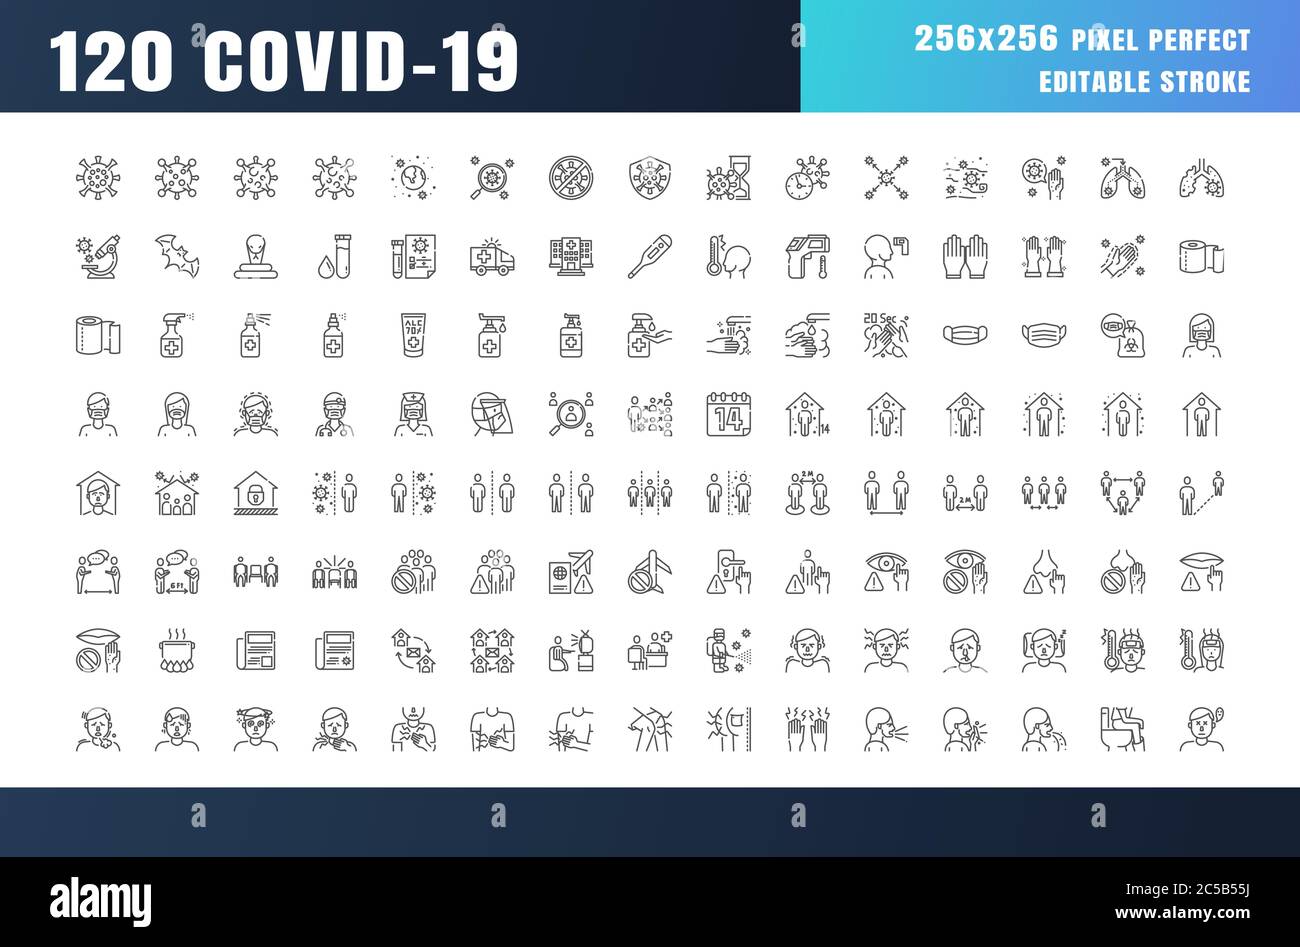 Covid-19 Prevention Line Outline Icons. Coronavirus, Social Distancing, Quarantine, Stay Home. 256x256 Pixel Perfect. Editable Stroke. Stock Vector